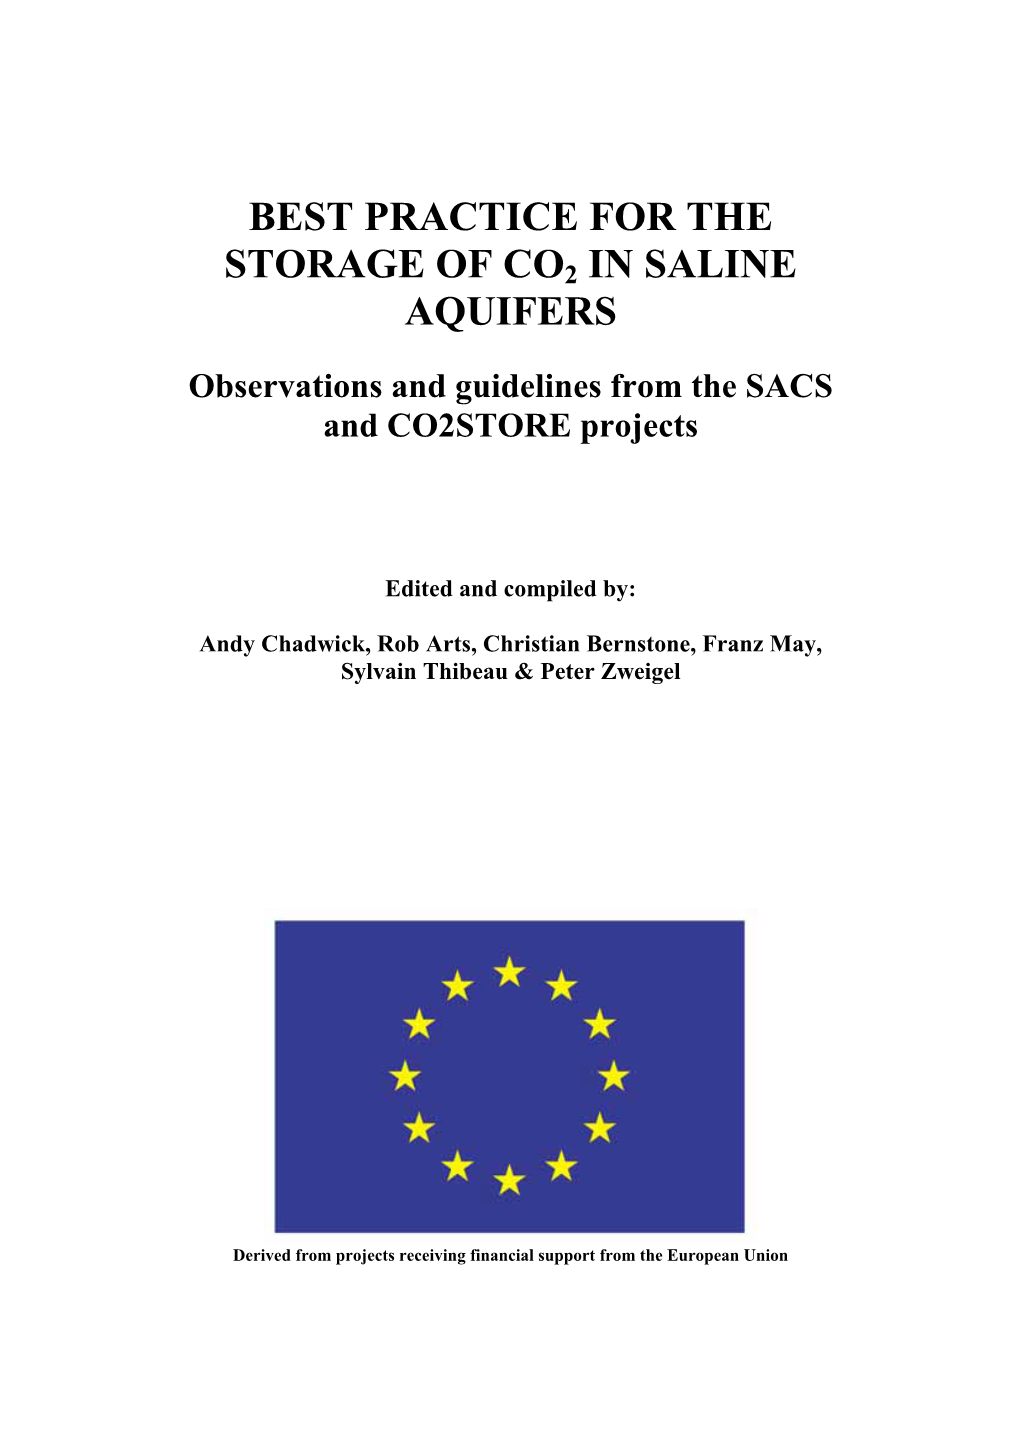 Best Practice for the Storage of Co2 in Saline Aquifers